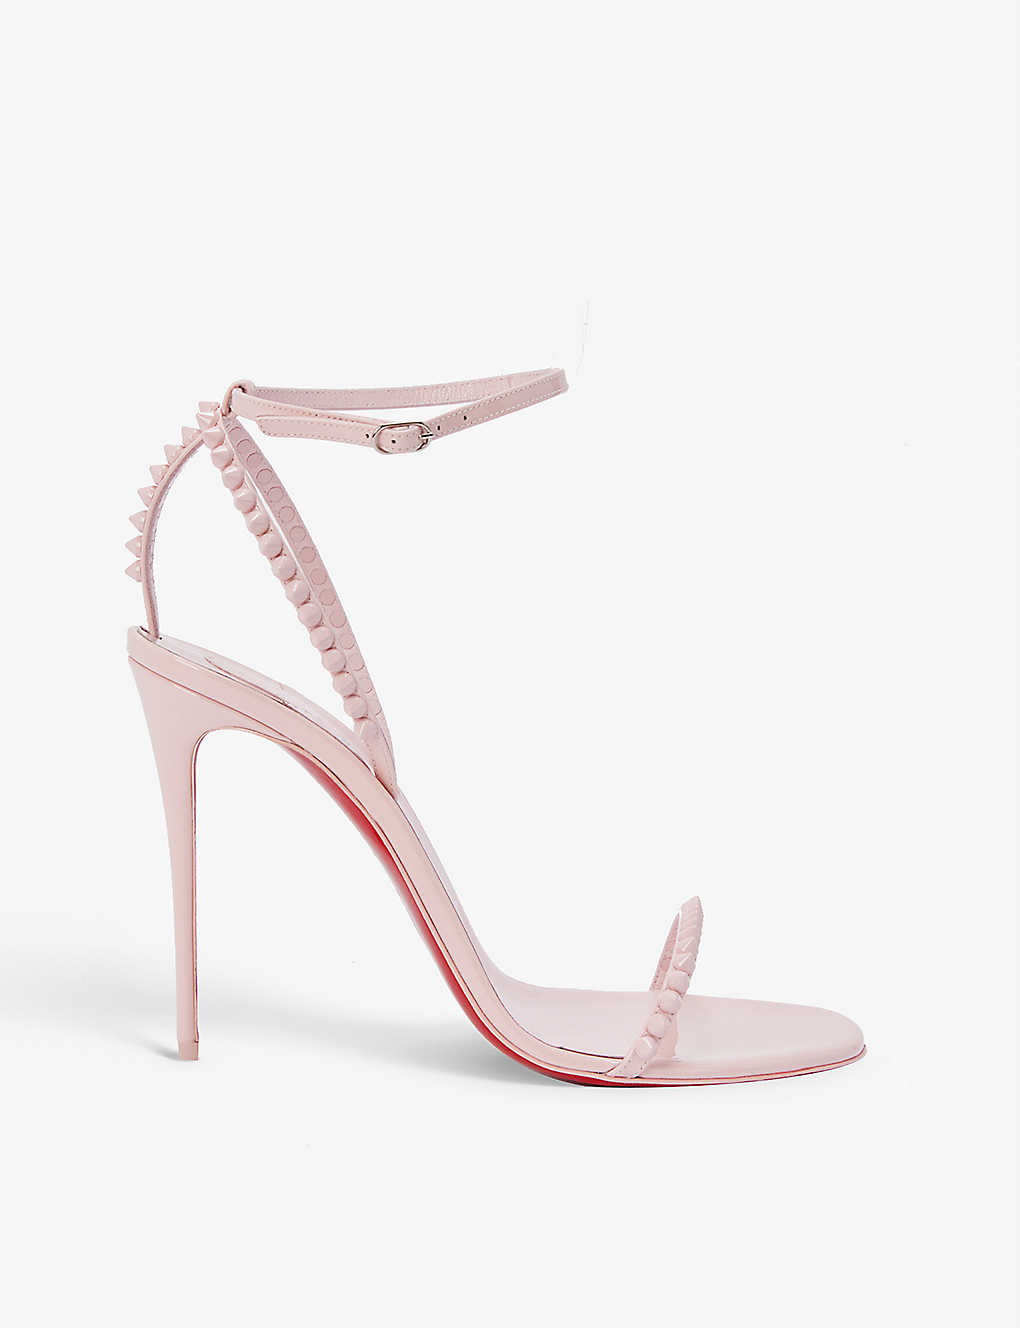 CHRISTIAN LOUBOUTIN SO ME 100 PATENT-LEATHER HEELED SANDALS